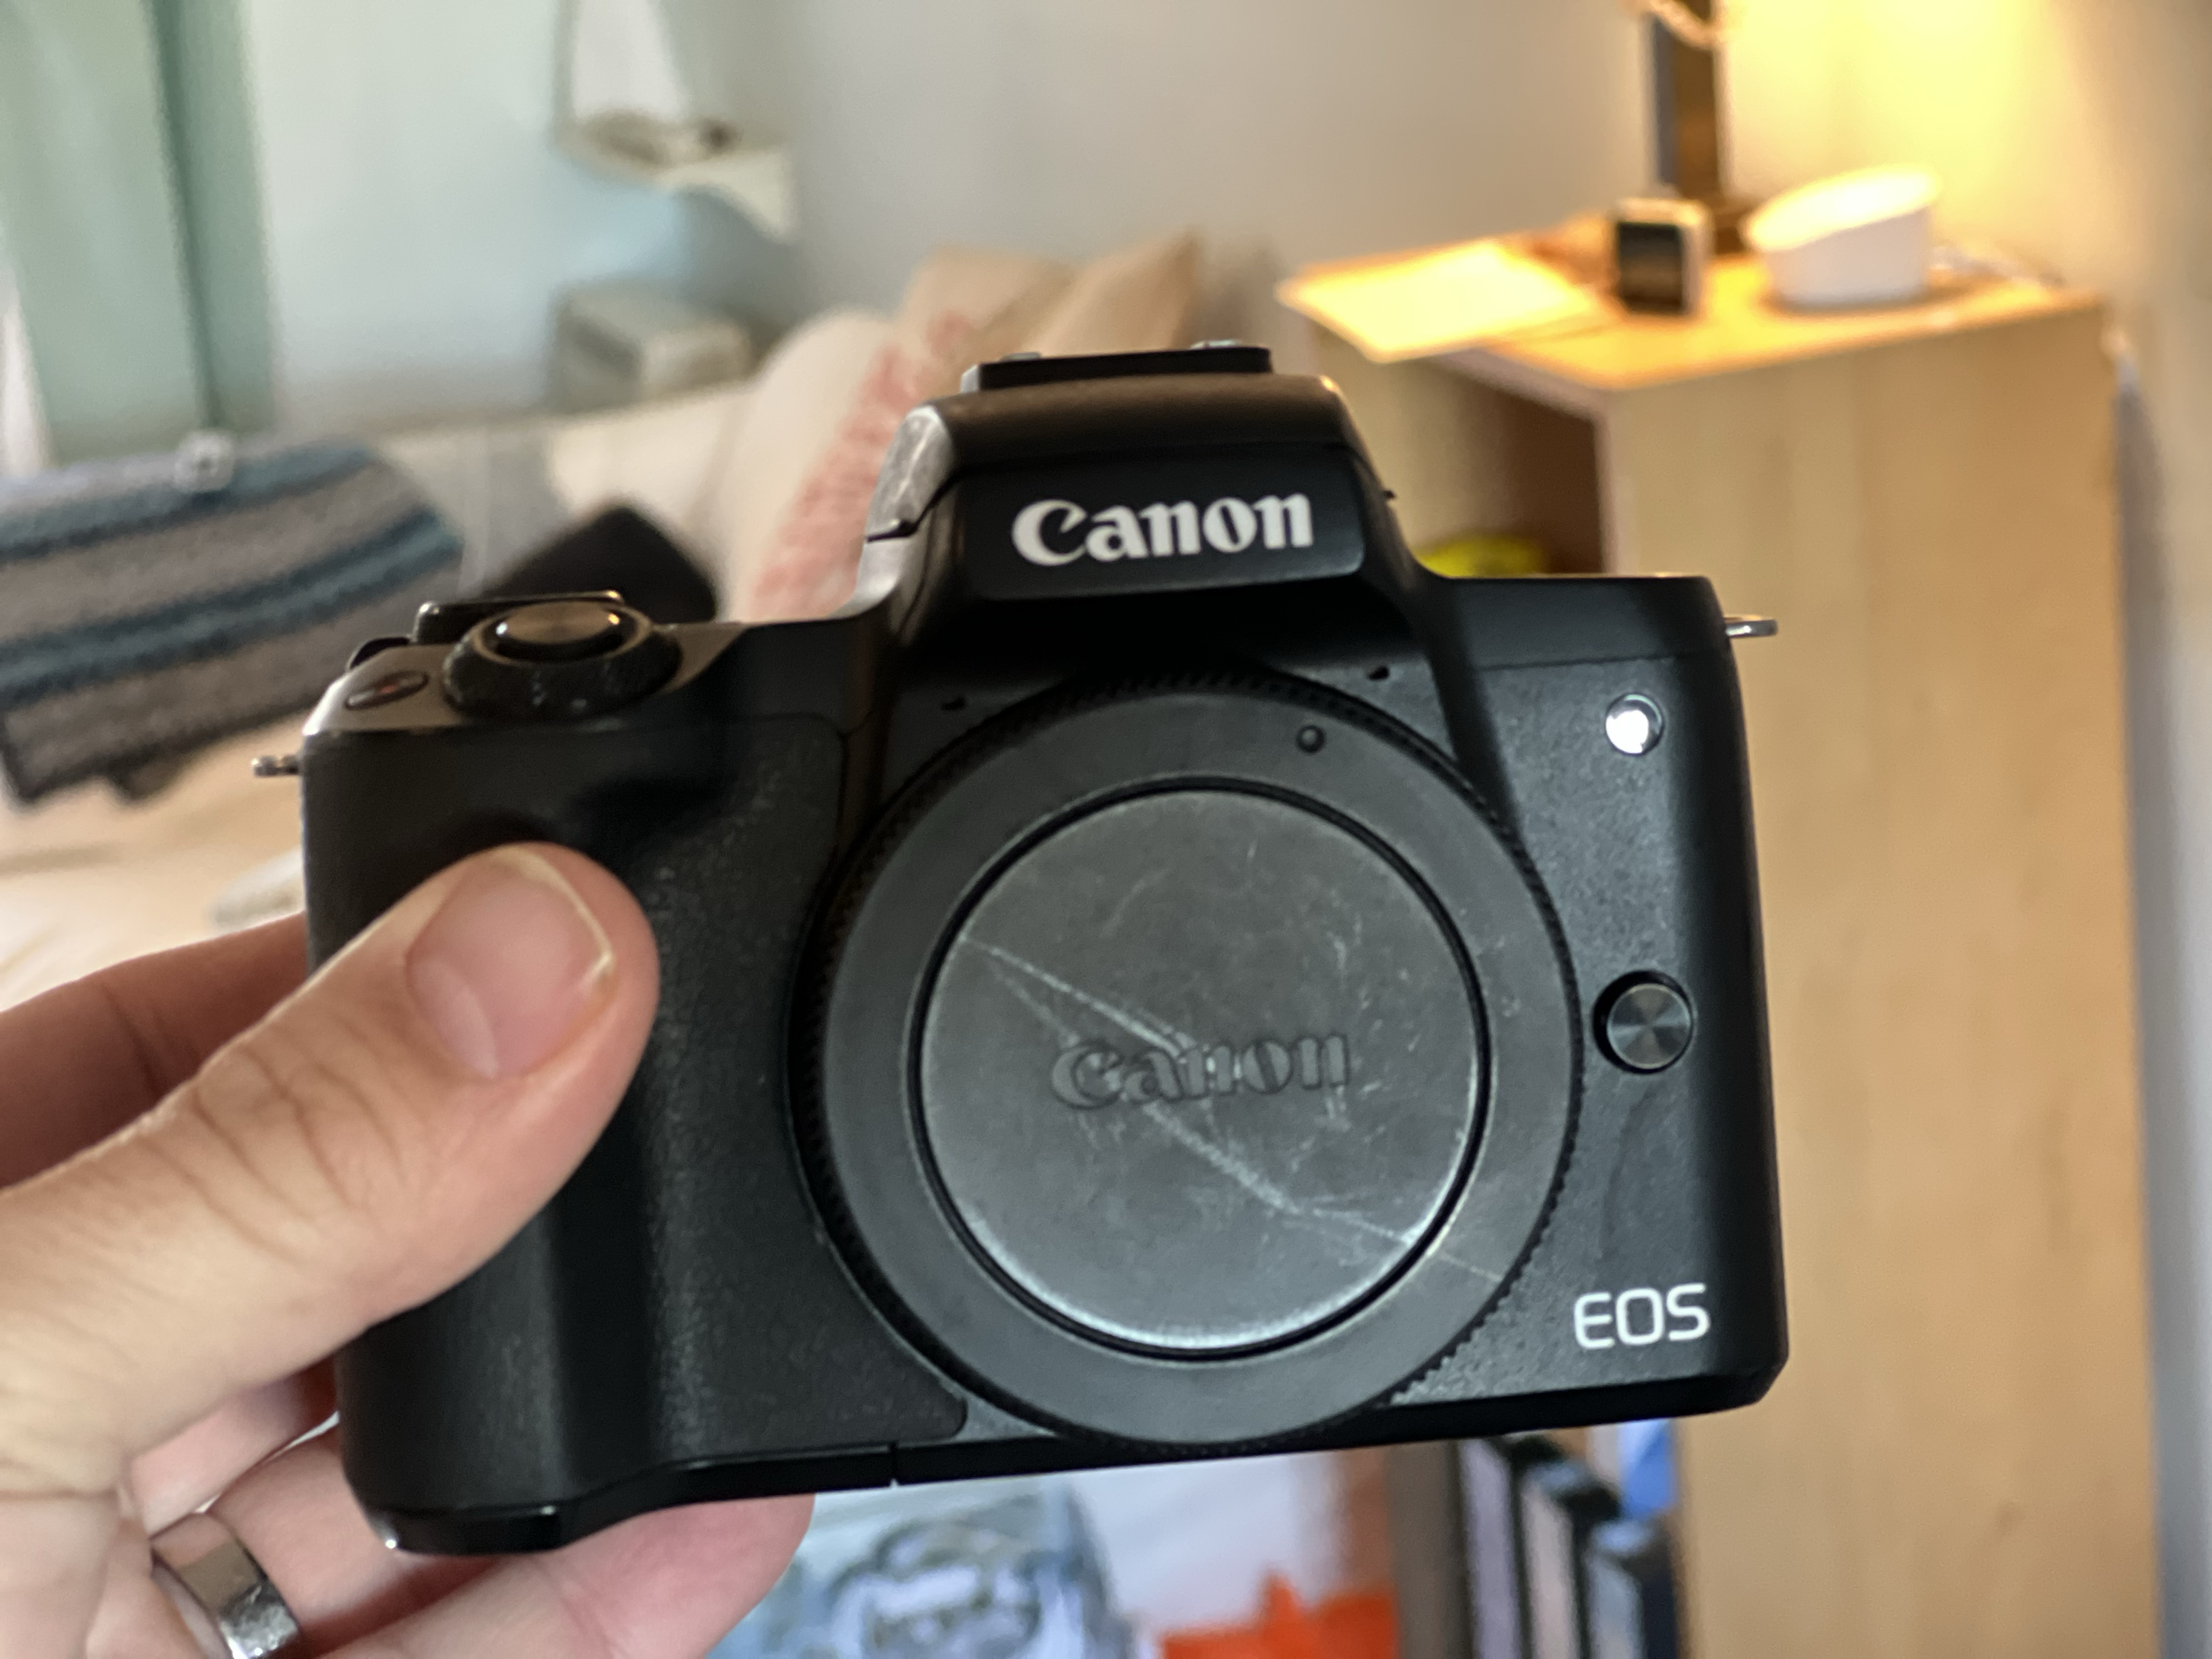 My repaired Canon M50